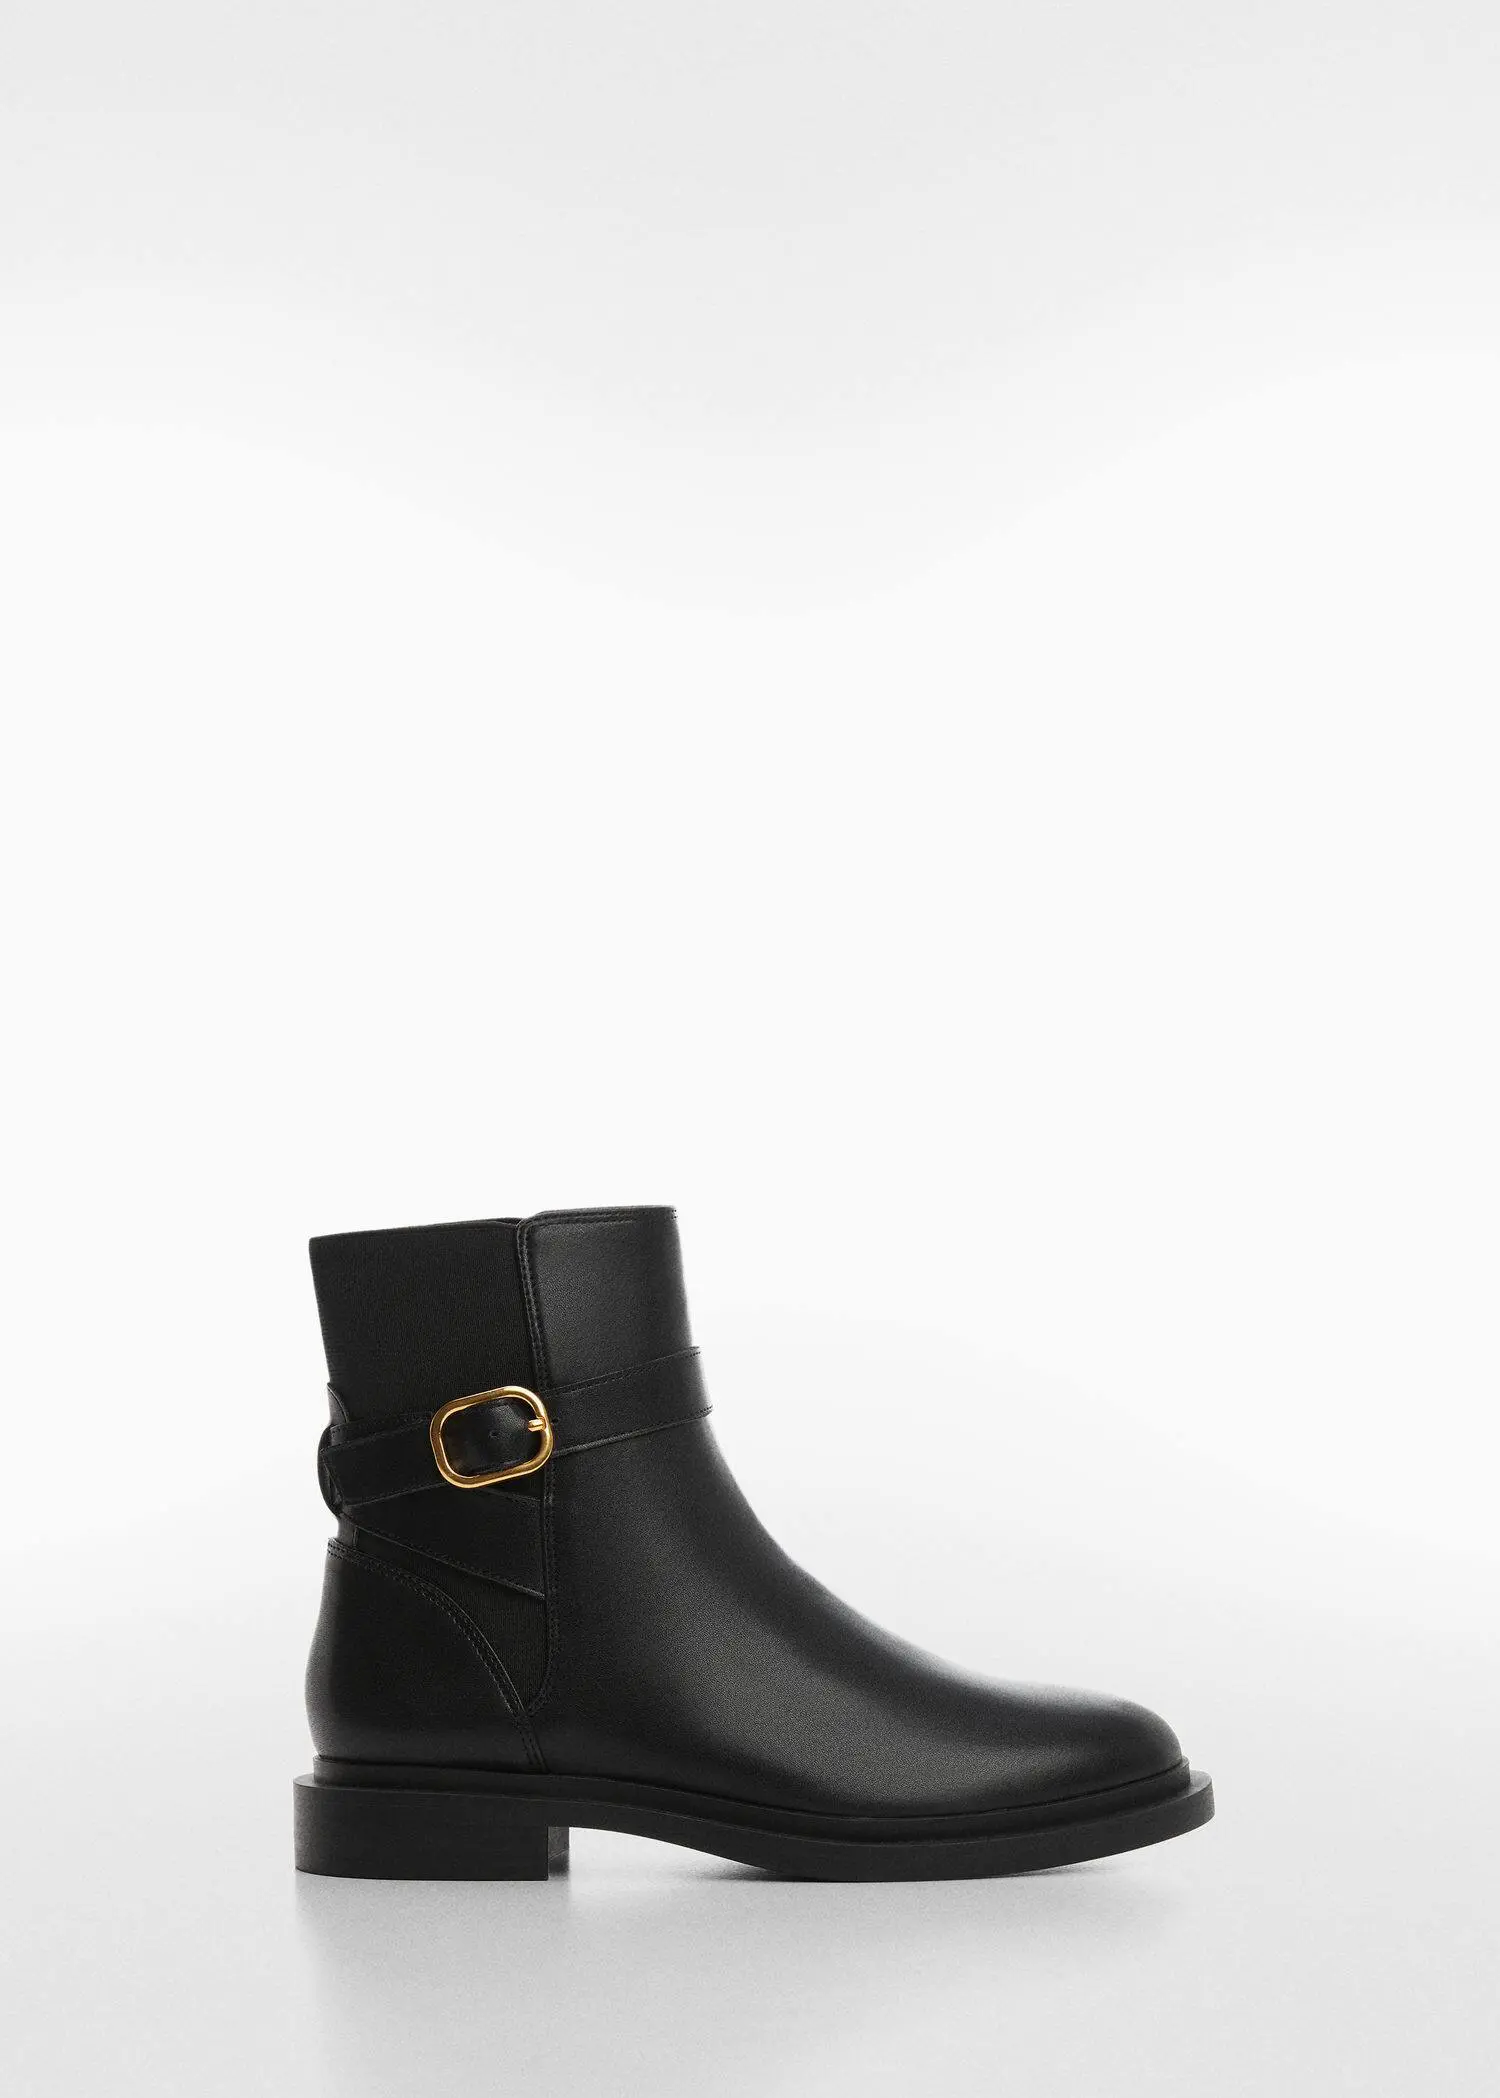 Mango Ankle boots with elastic panel and buckle. 2